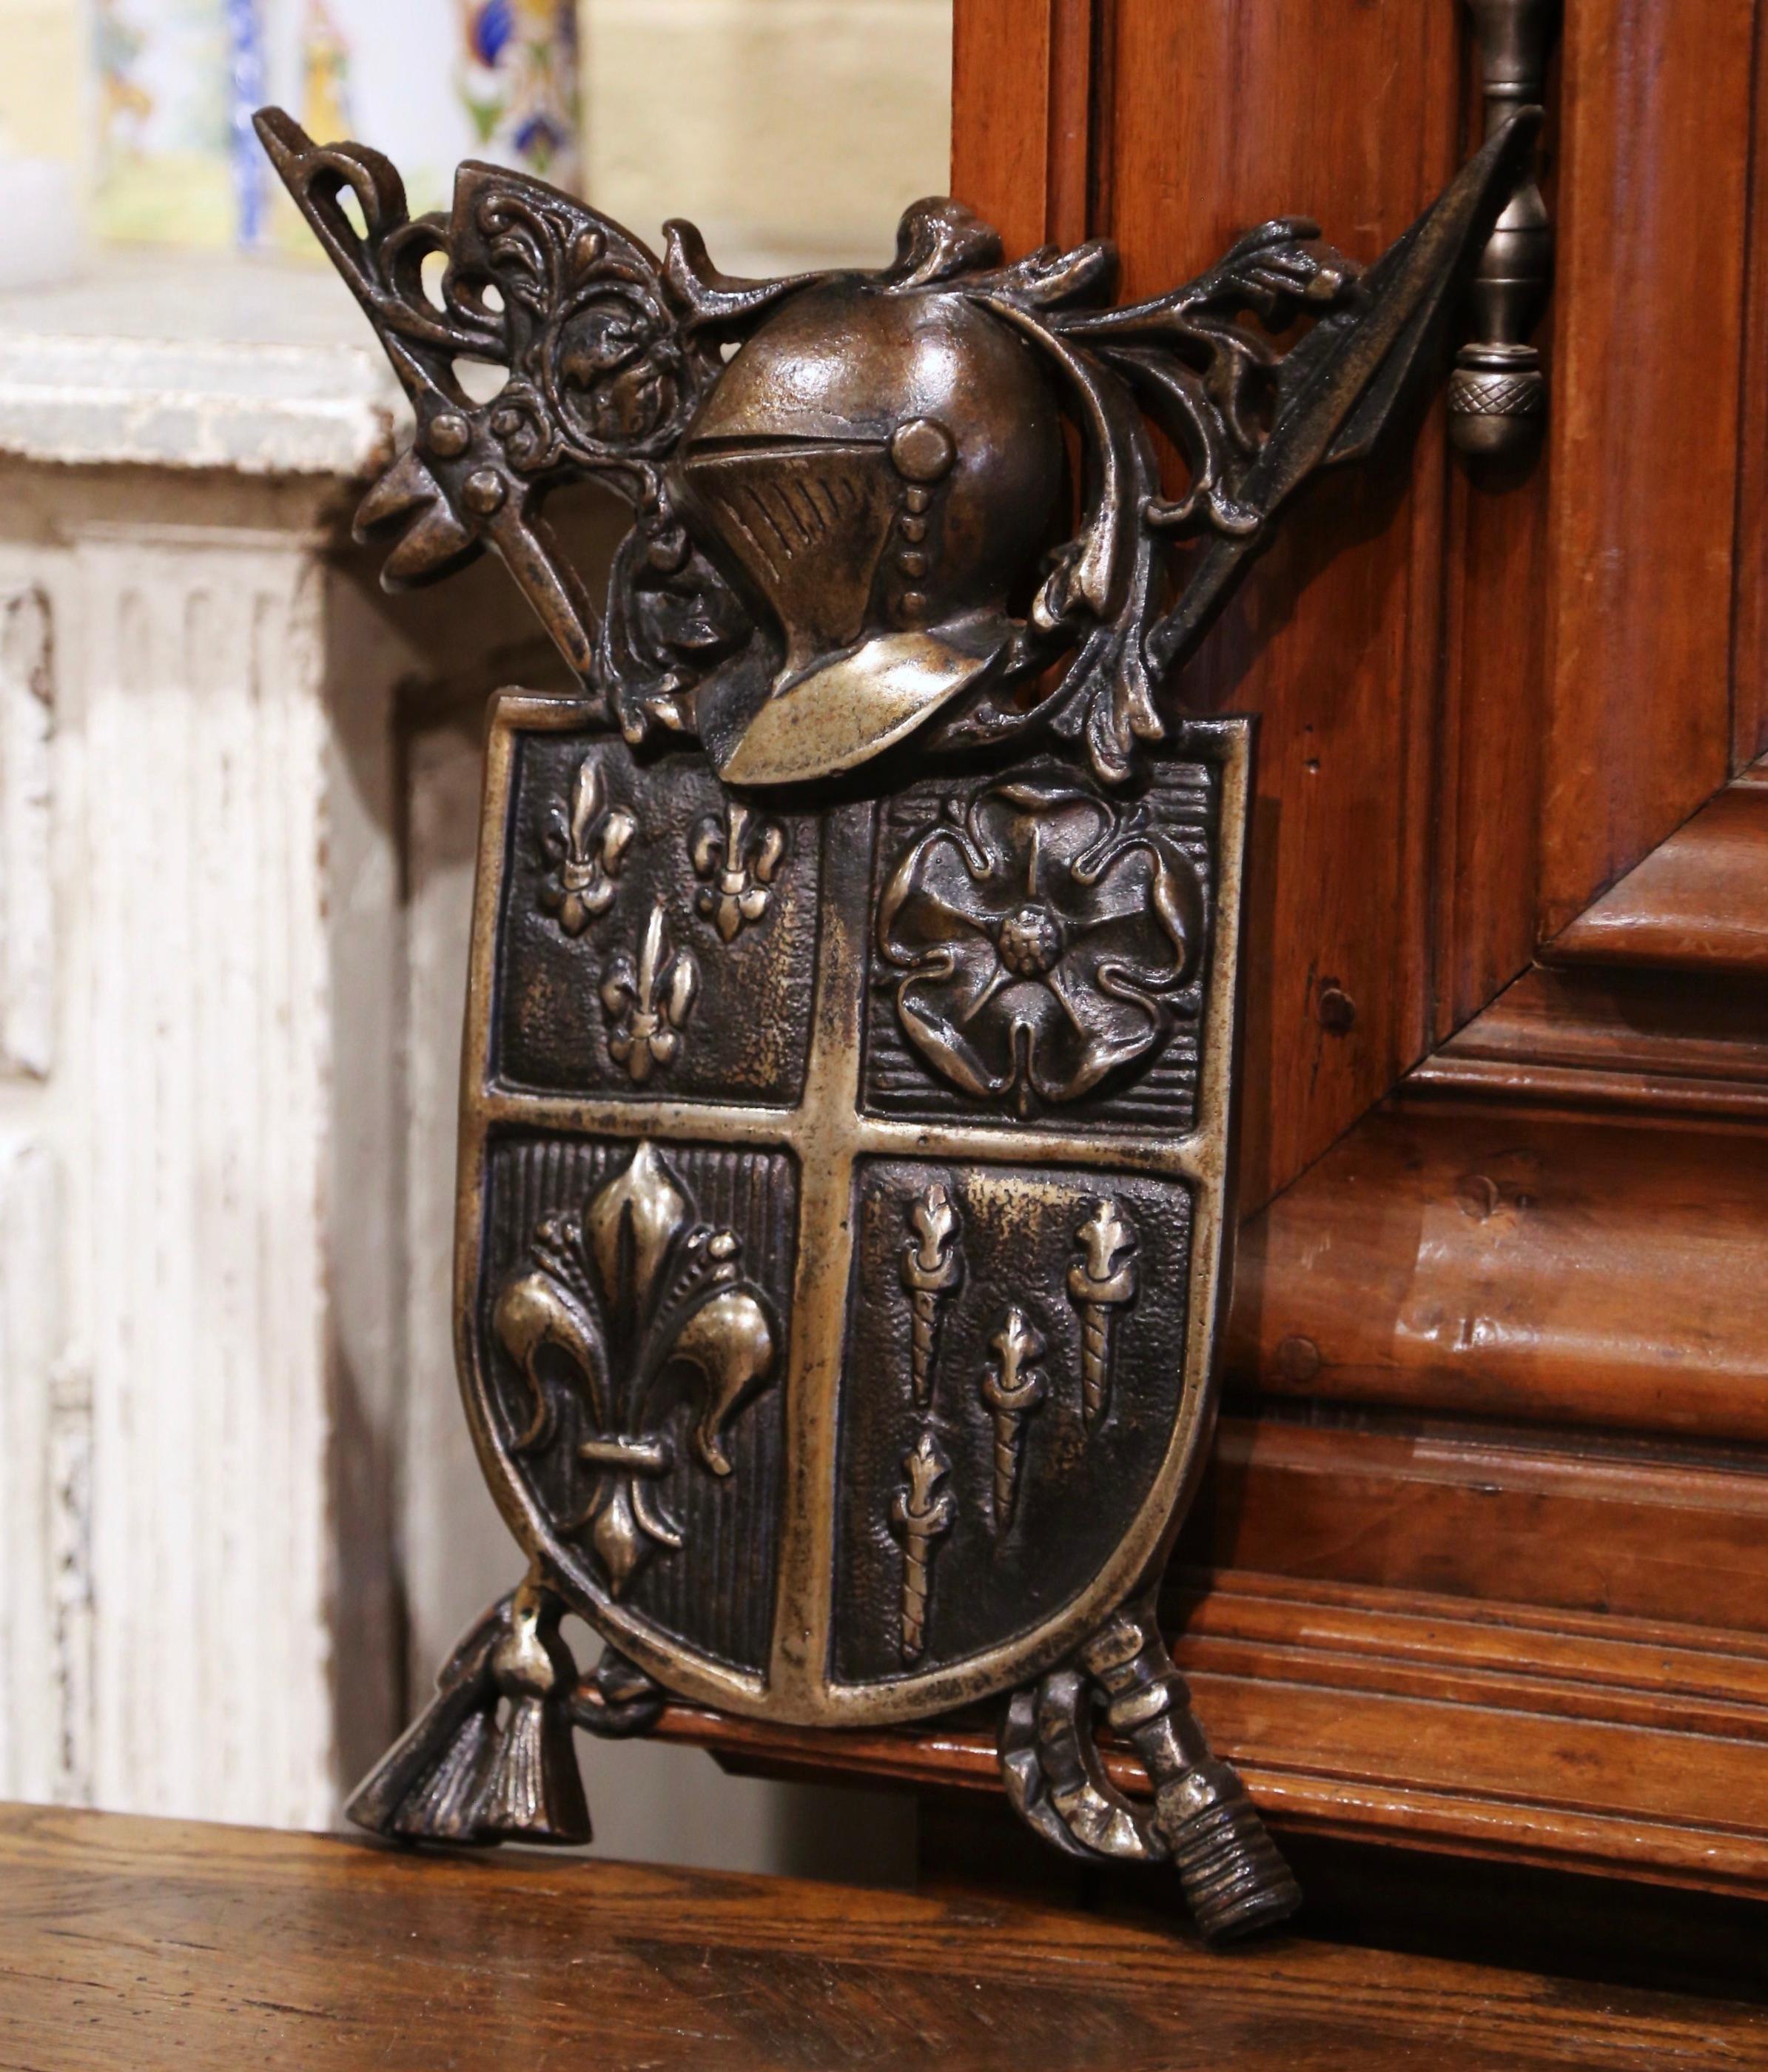 This antique heraldic carved coat of arms was crafted in France circa 1880; the crest, topped with a helmet, crossed spear and battle axe, features a center blason decorated with Fleur-de-Lis, torch and rose flower motifs. The wall emblem is in